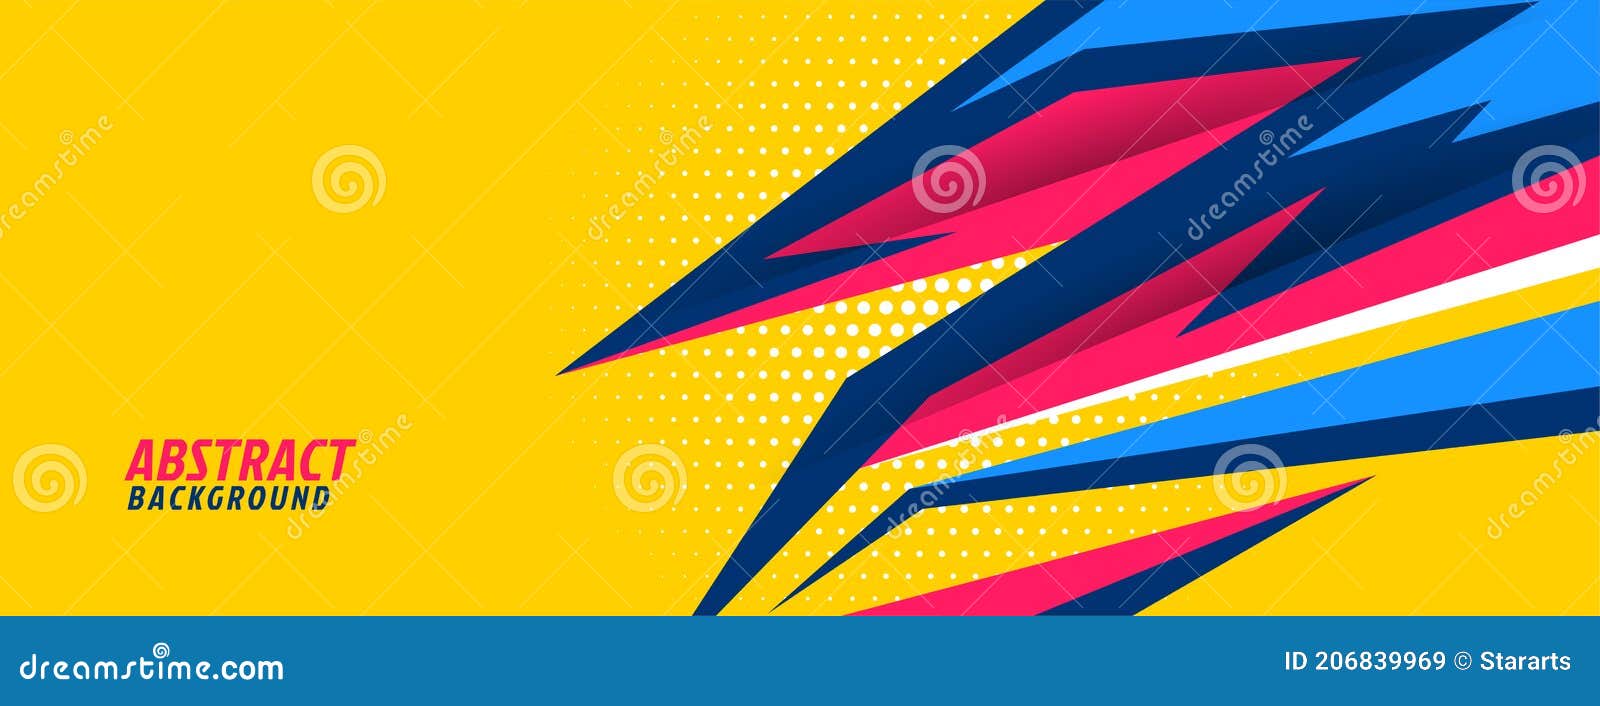 Premium Vector  Modern sports neon gaming abstract background with  geometric shapes gradient